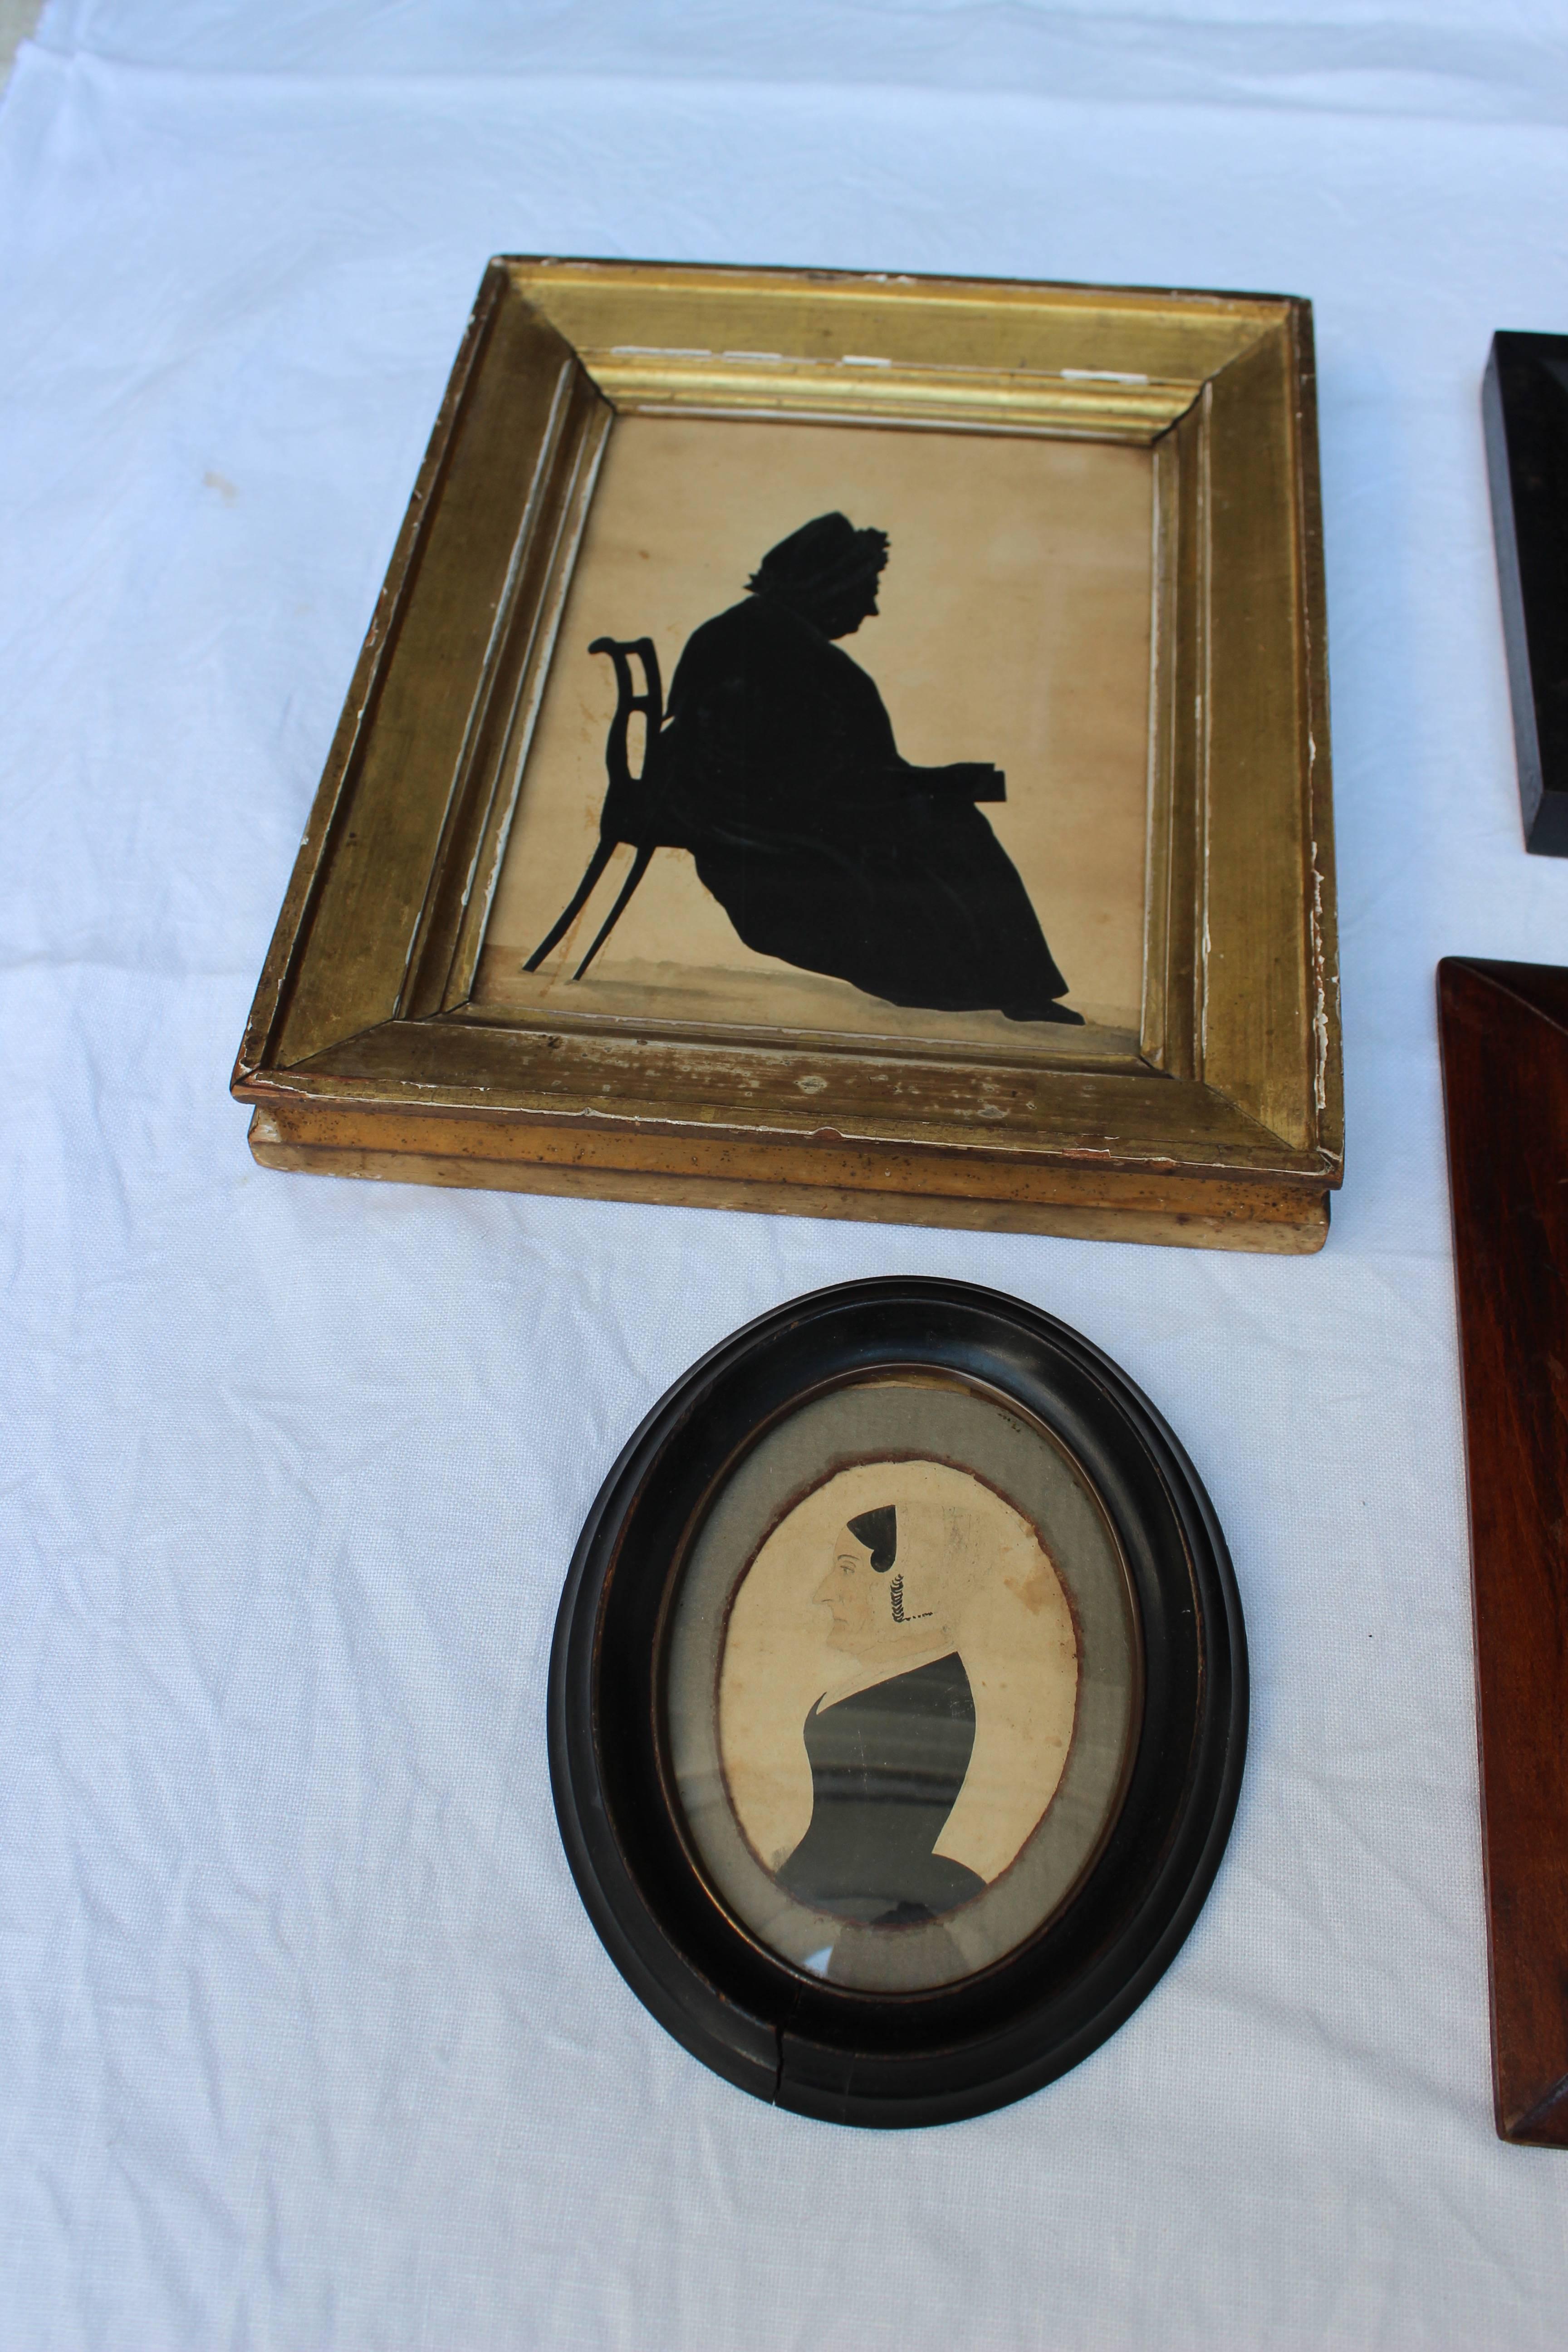 Collection of 18th and 19th century antique silhouettes.

Largest: 9.25